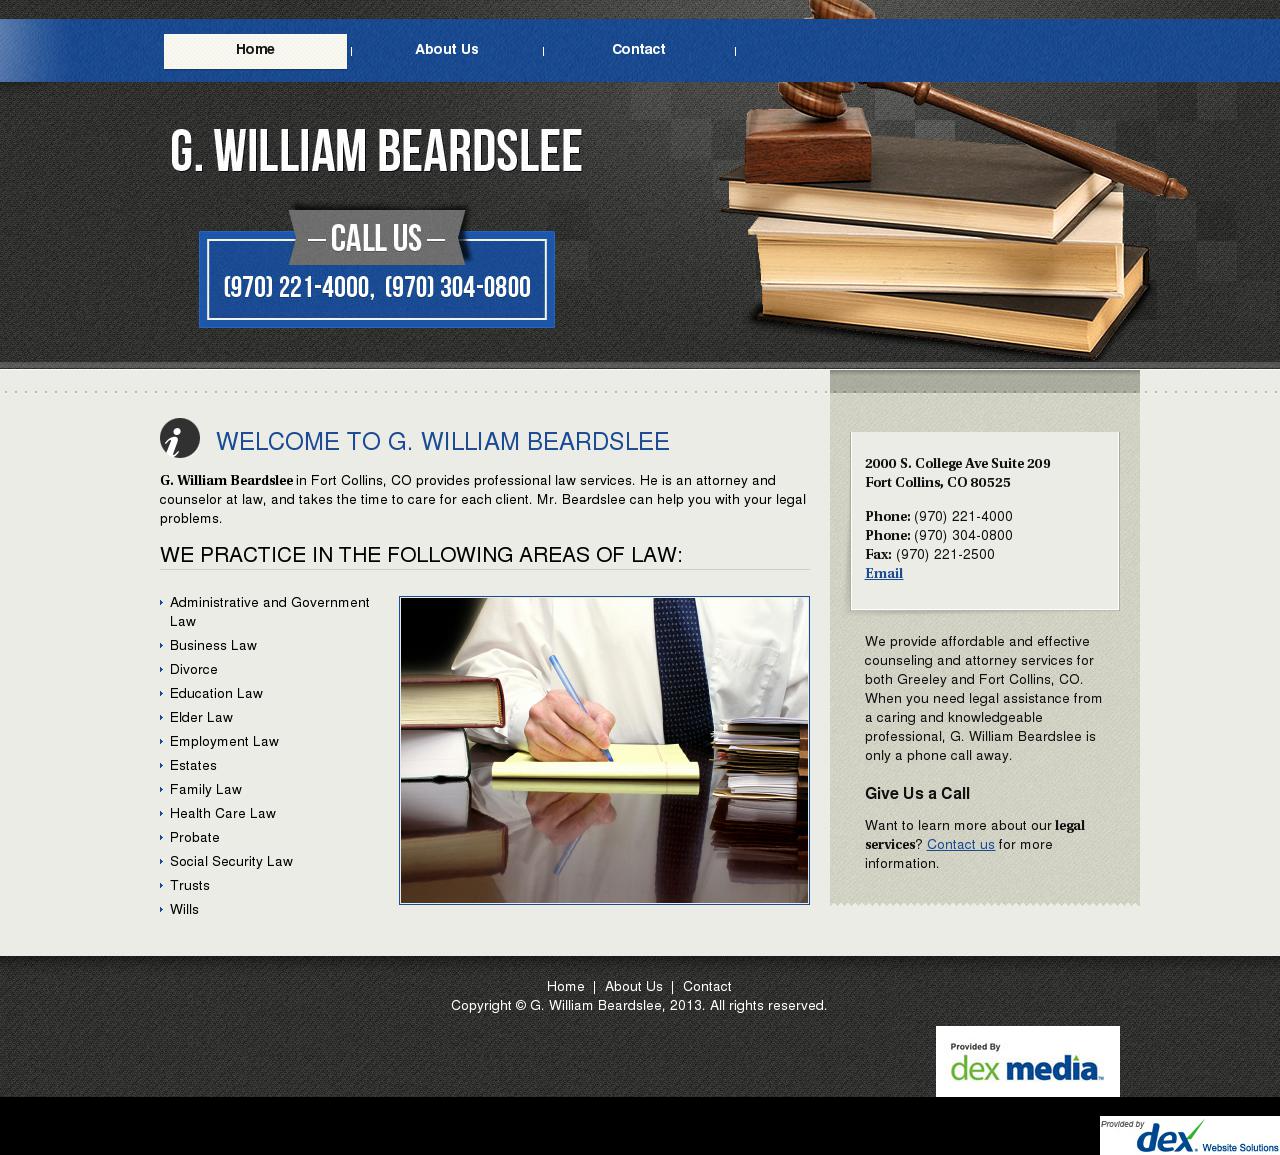 Beardslee, William G - Fort Collins CO Lawyers